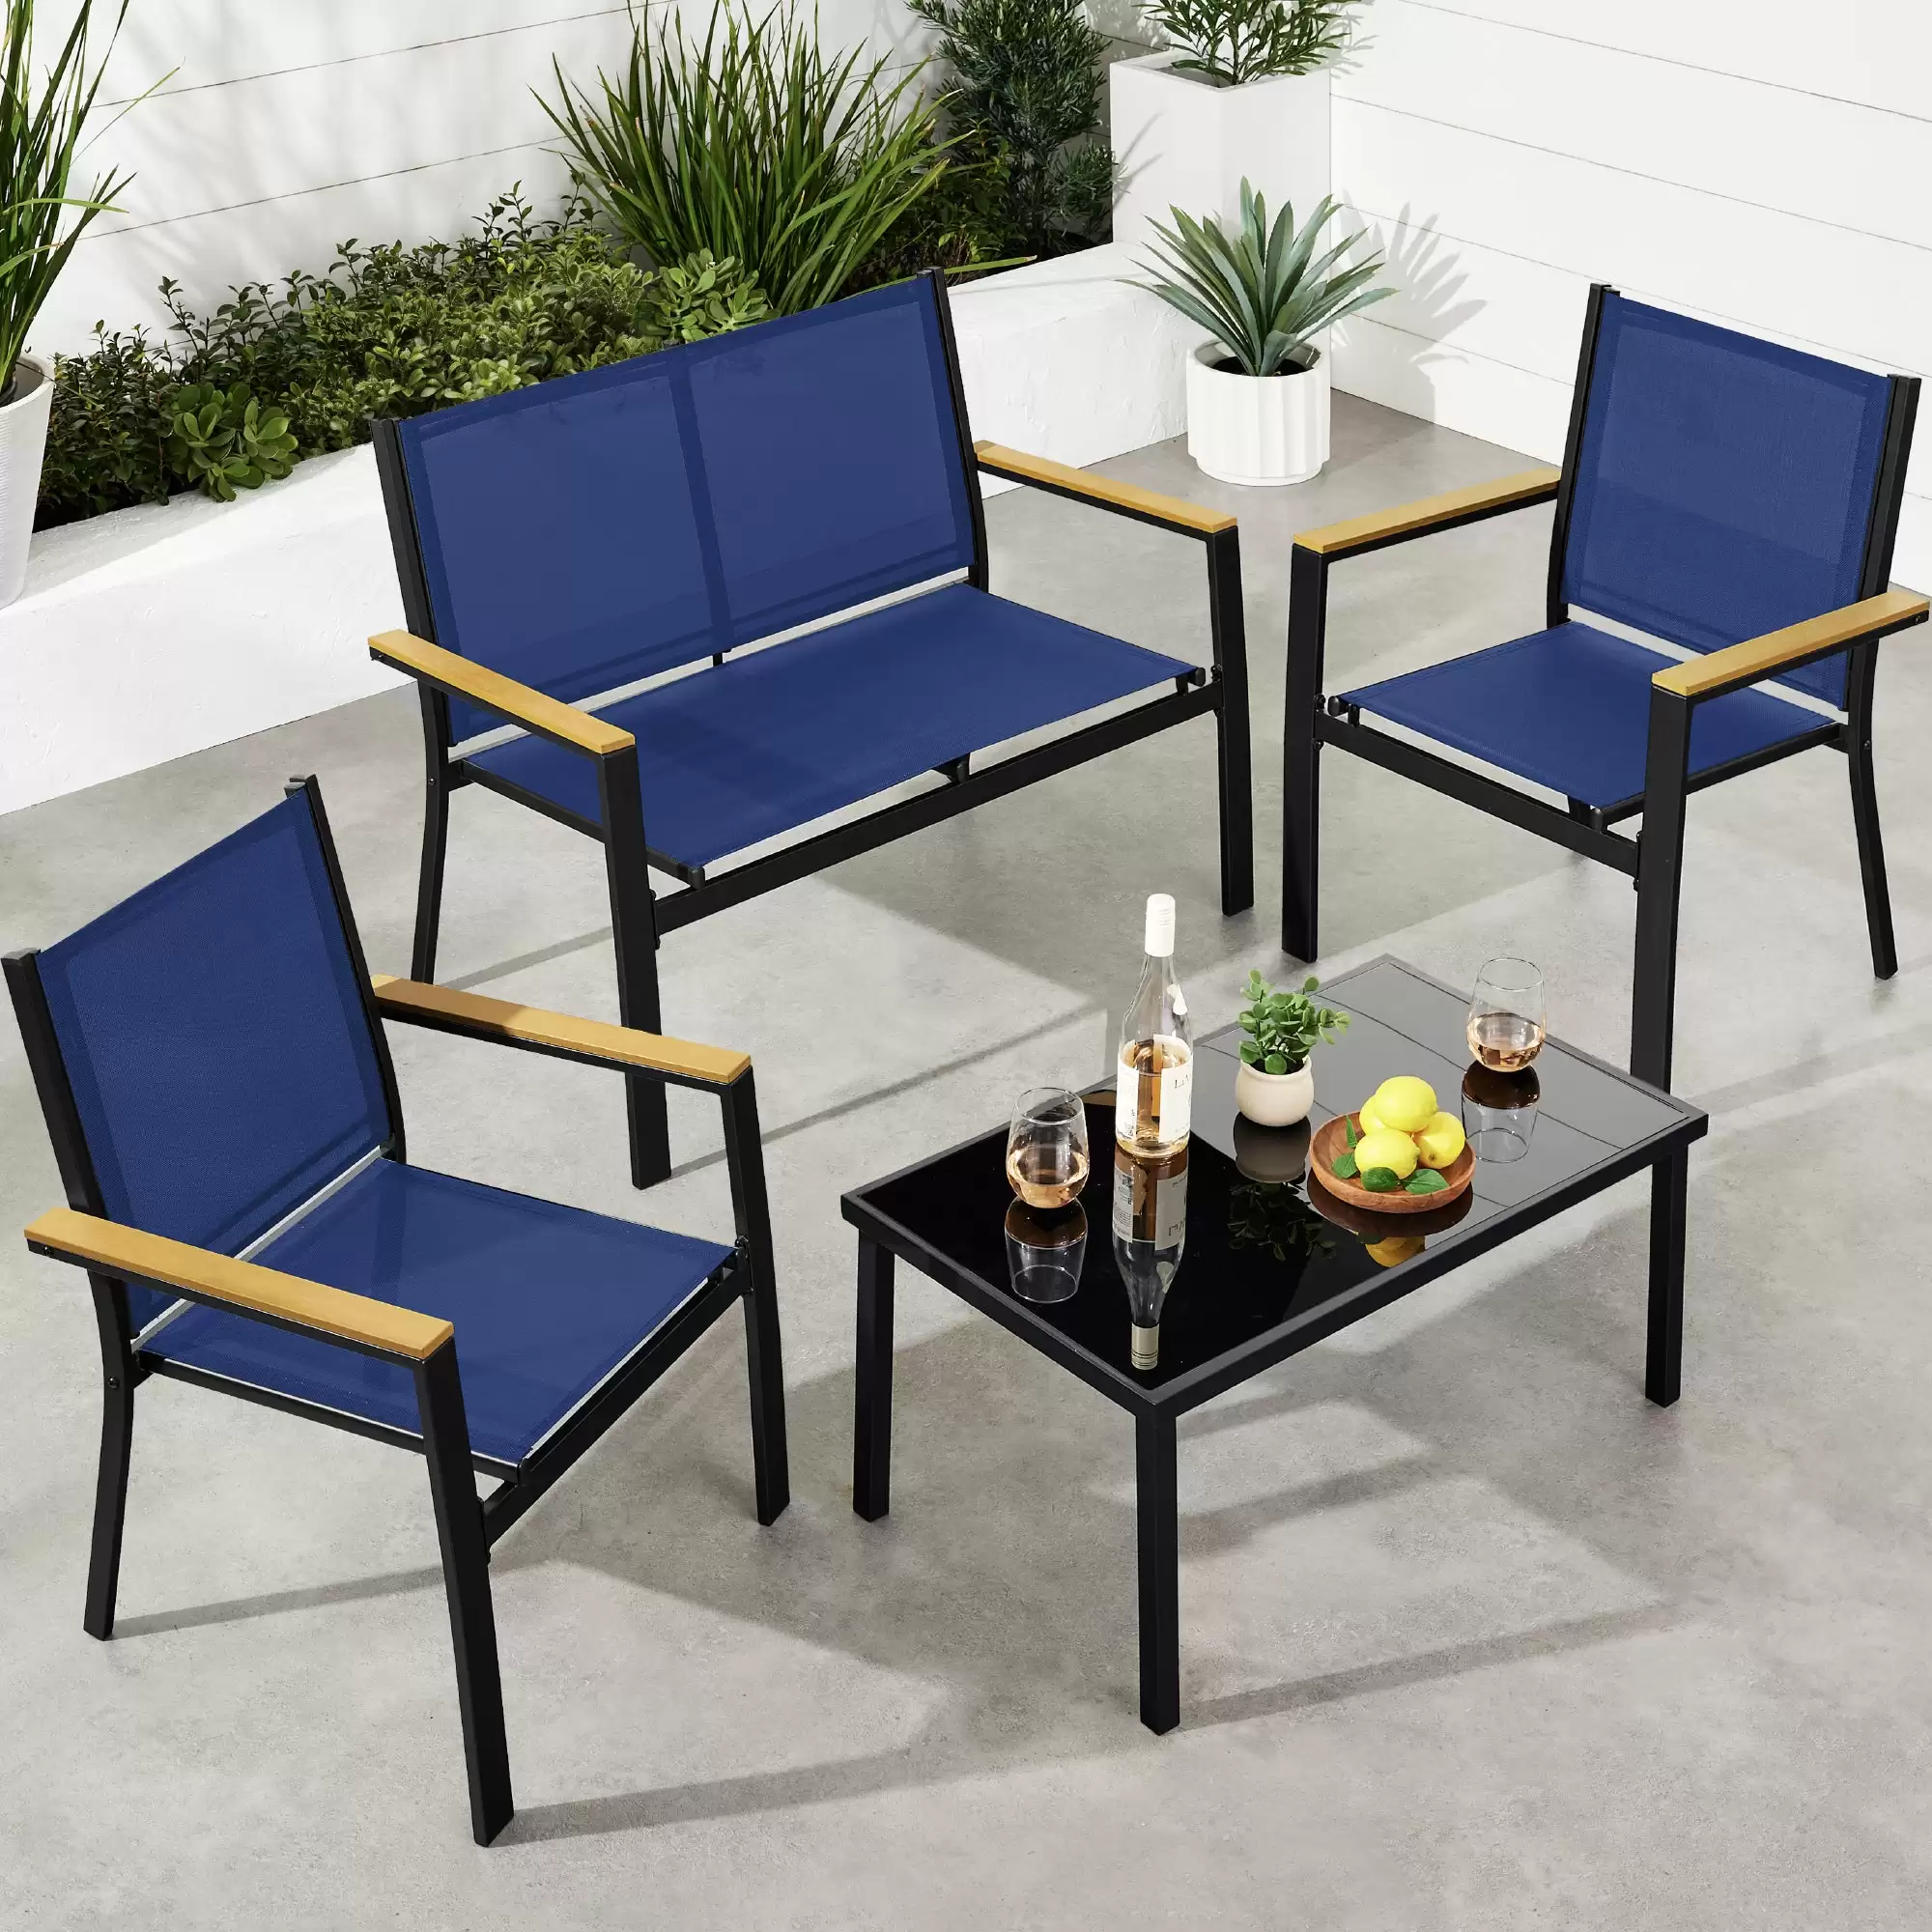 Pay Only $179.99 4-Piece Textilene Outdoor Conversation Set W/ Cushions With This Bestchoiceproducts Discount Voucher